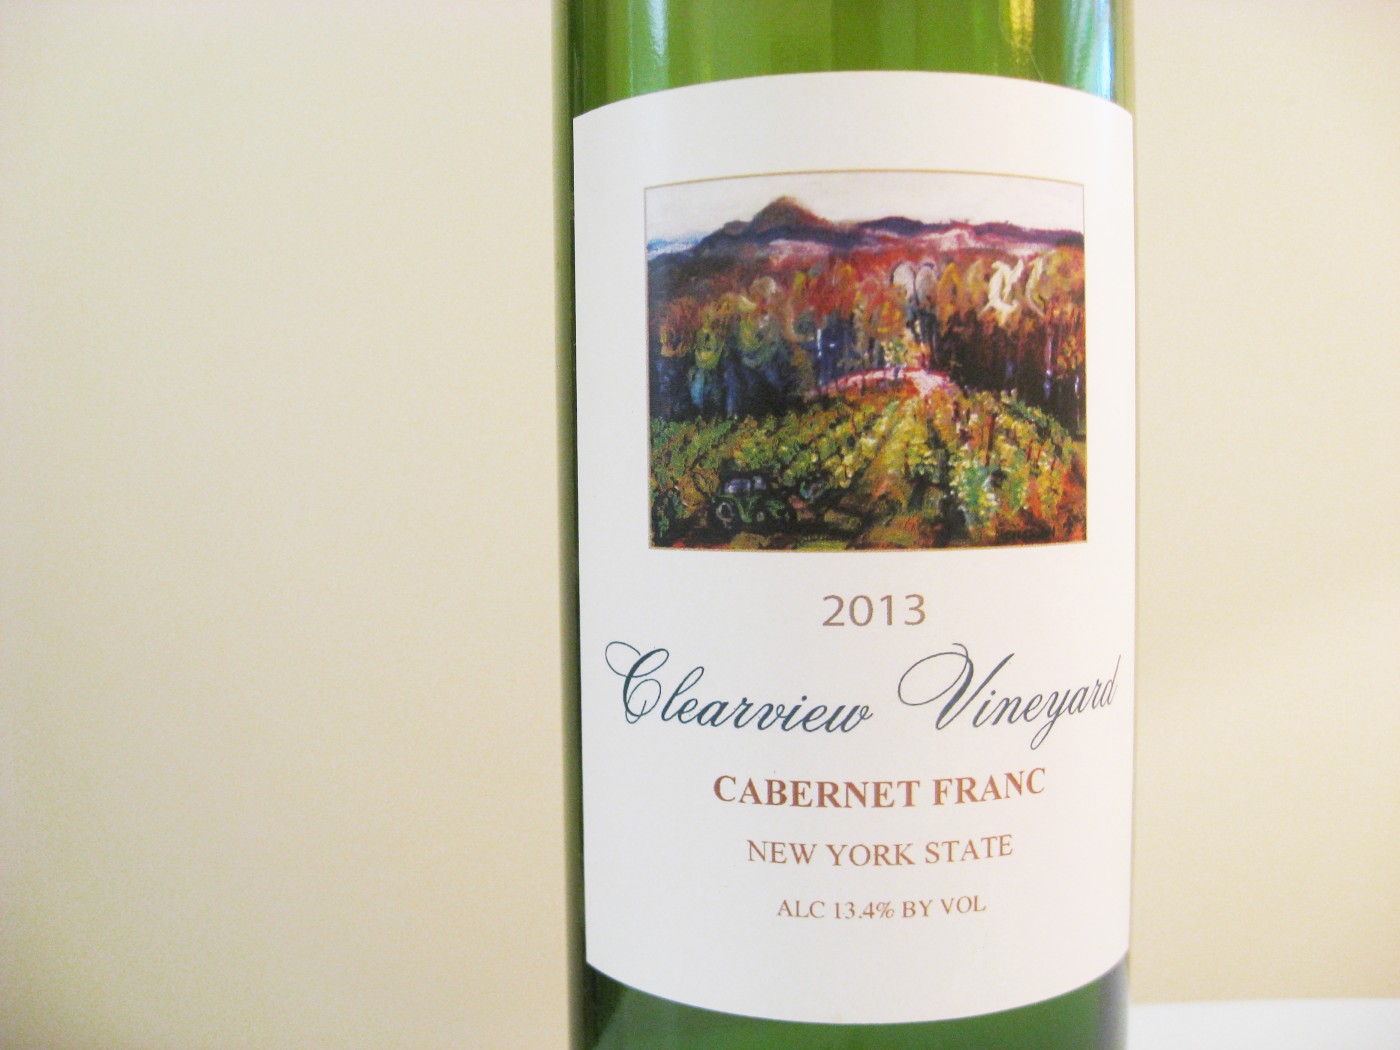 Clearview Vineyard, Cabernet Franc 2013, New York, Wine Casual